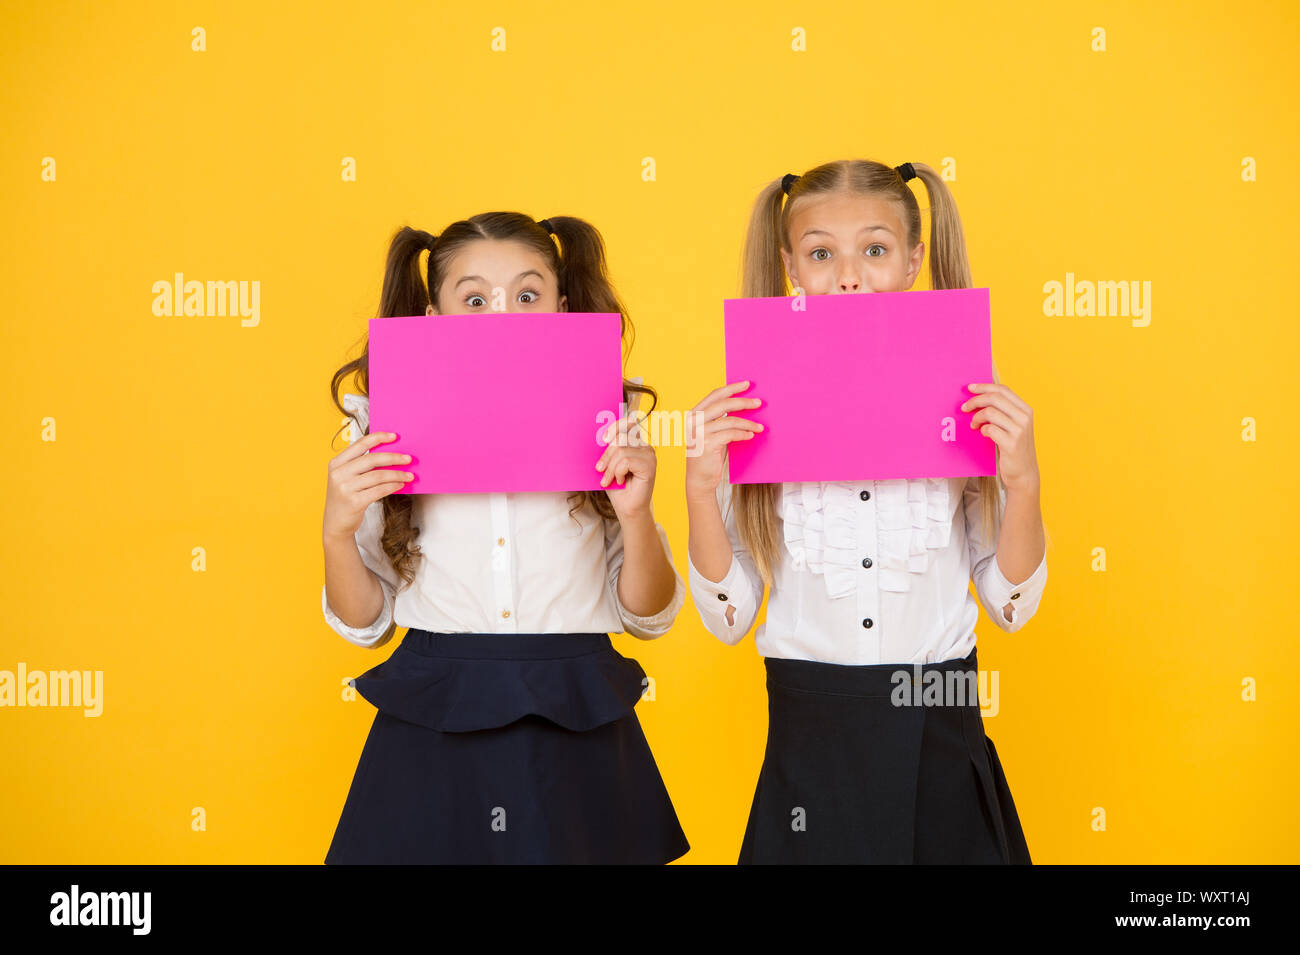 Drawing attention. Happy kids holding empty sheets of paper. Little kids smiling with pink drawing papers. Small kids smiling with blank advertisement posters. Cute kids advertising, copy space. Stock Photo